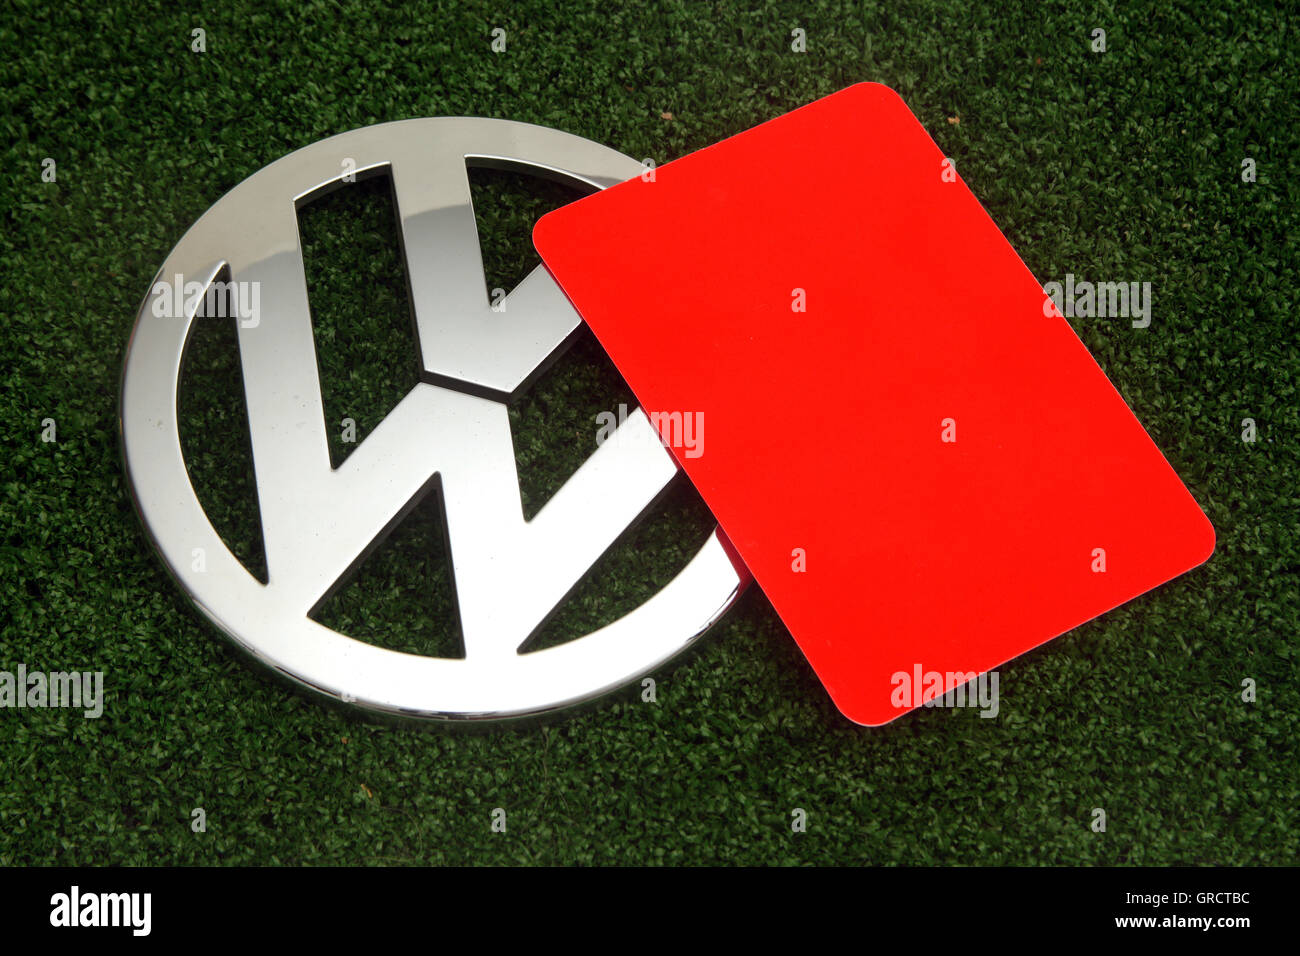 Red Card With Vw Sign On Green Turf Stock Photo